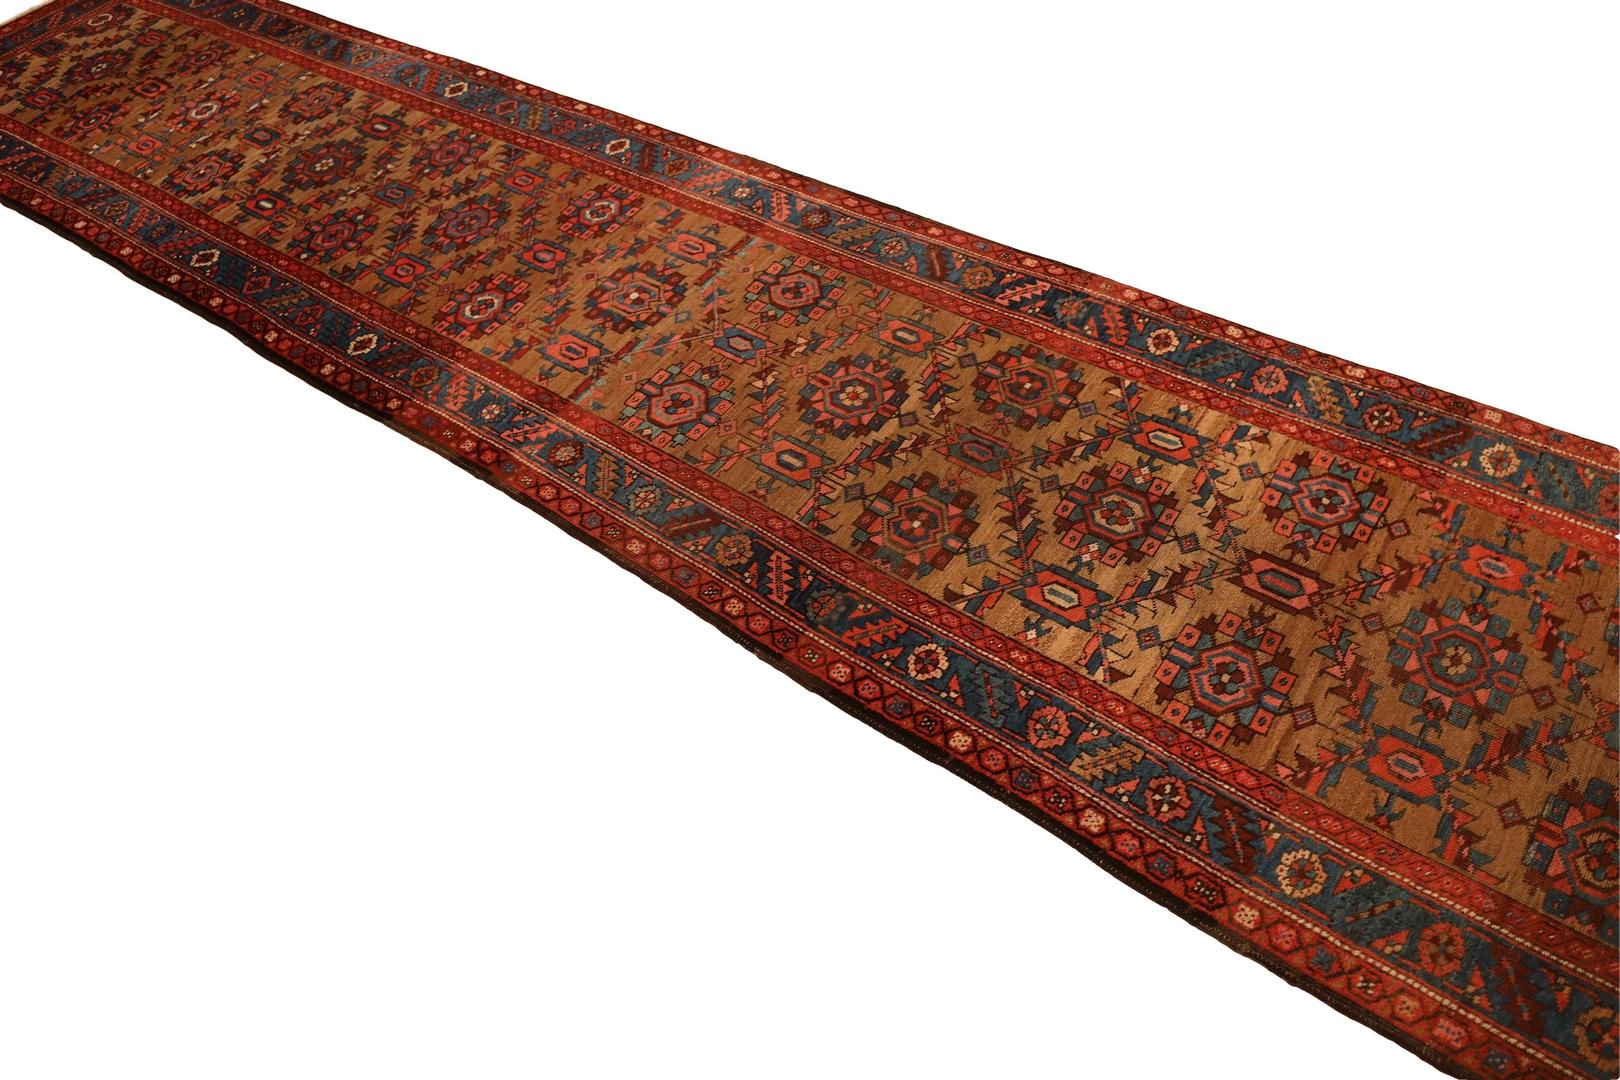 Hand-Knotted North-West Persian Vintage Runner - 3'1